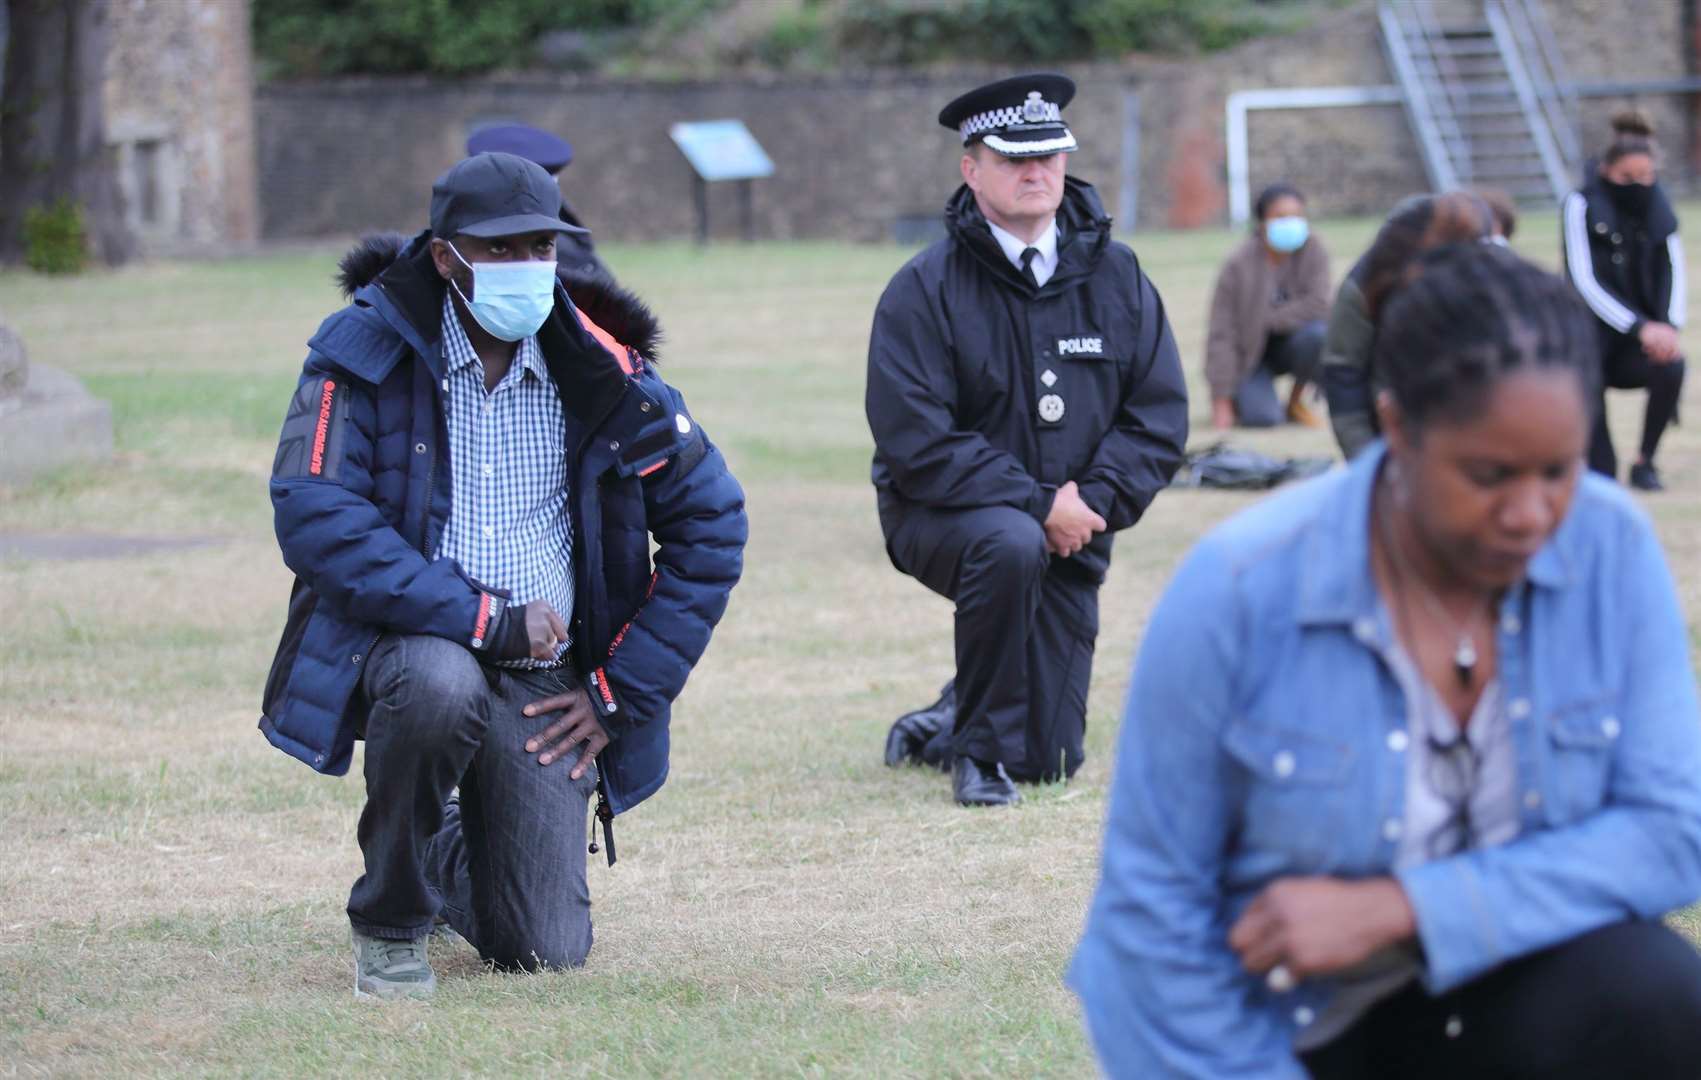 Another George Floyd protest allowed the community to come together in Fort Gardens, Gravesend